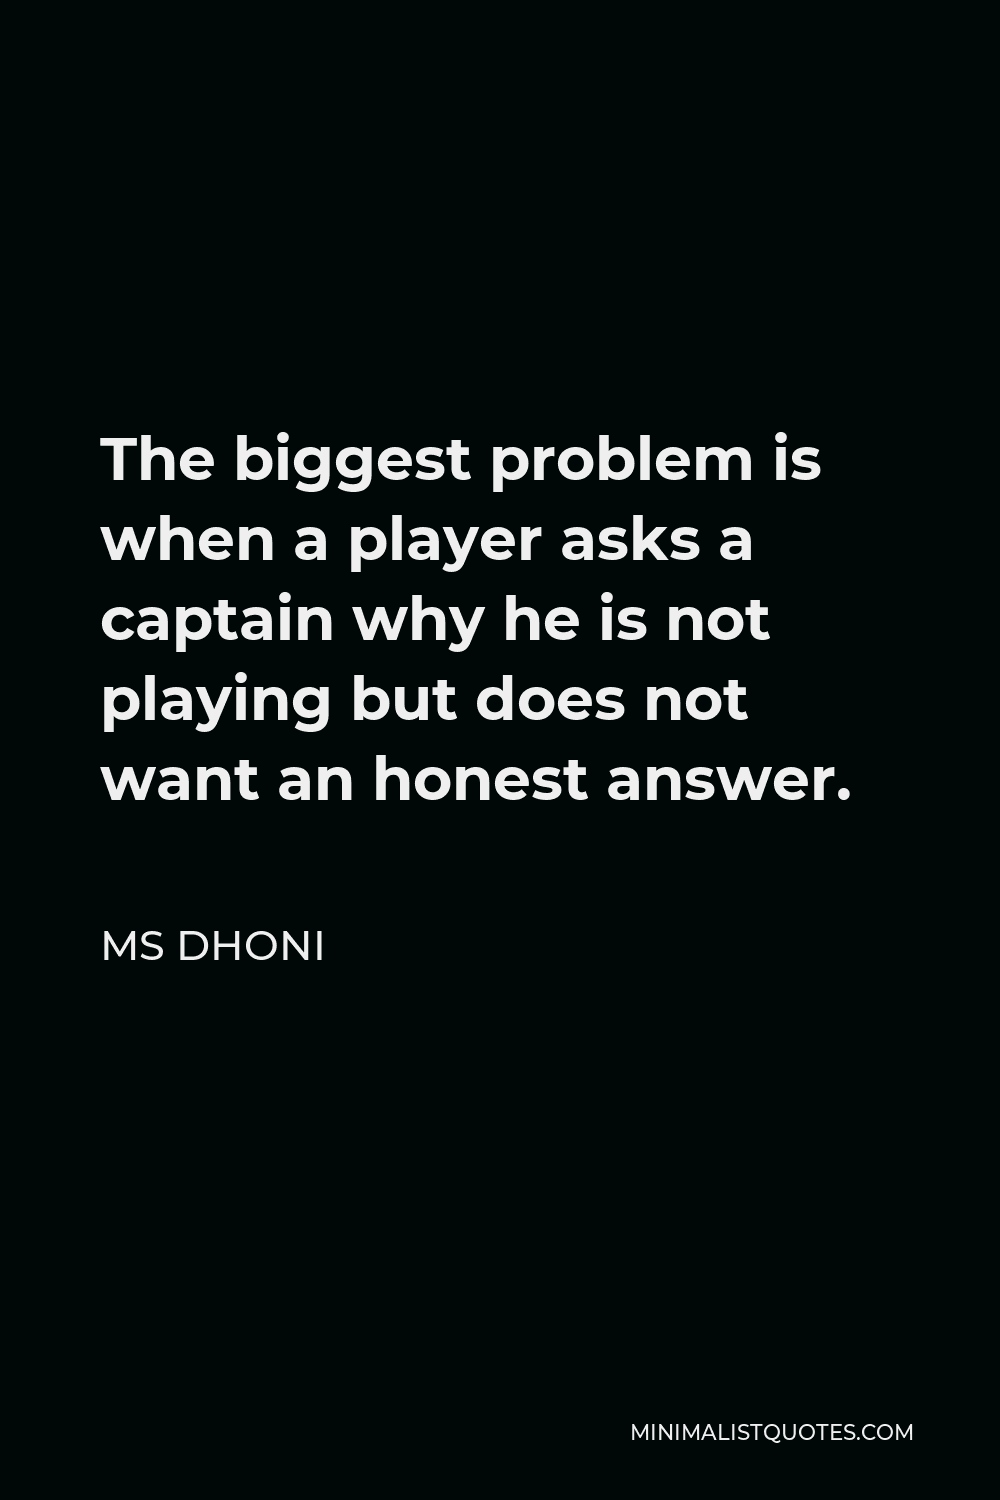 MS Dhoni Quote - The biggest problem is when a player asks a captain why he is not playing but does not want an honest answer.